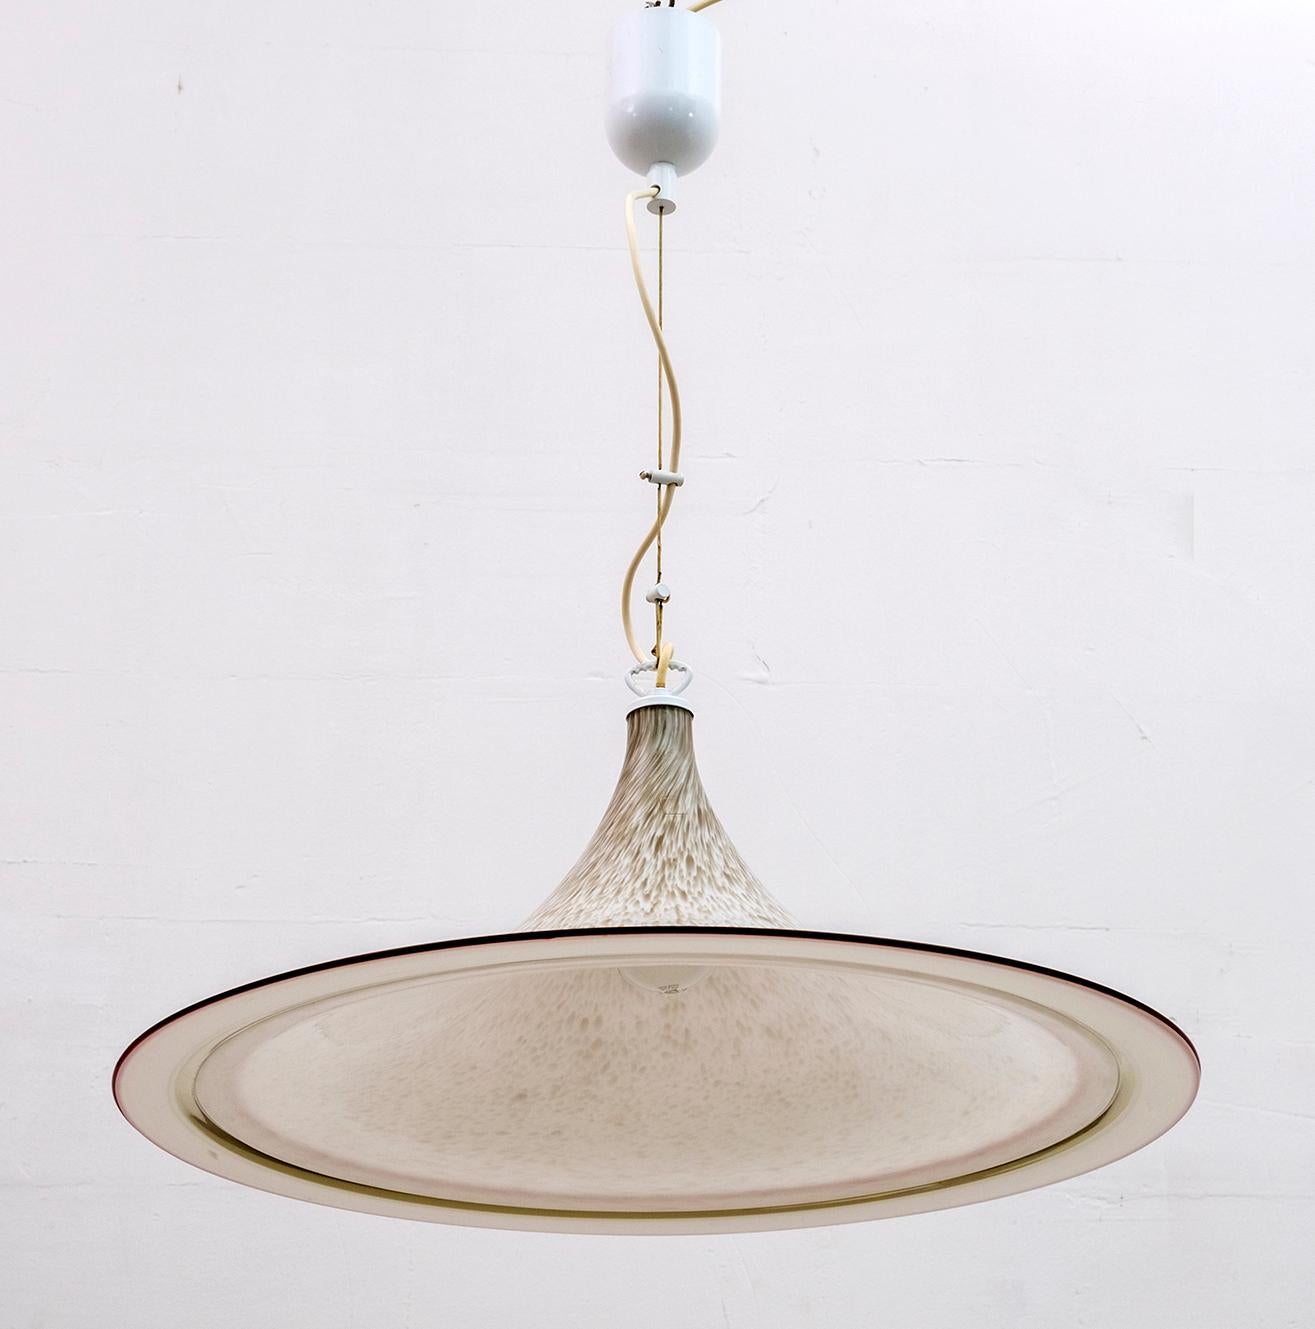 Modern but elegant hat chandelier in Murano glass, a suspension to be placed on worktops or simply in the center of a room. Illuminate widely and evenly.

The plate alone measures 62cm in diameter x 25cm in height.